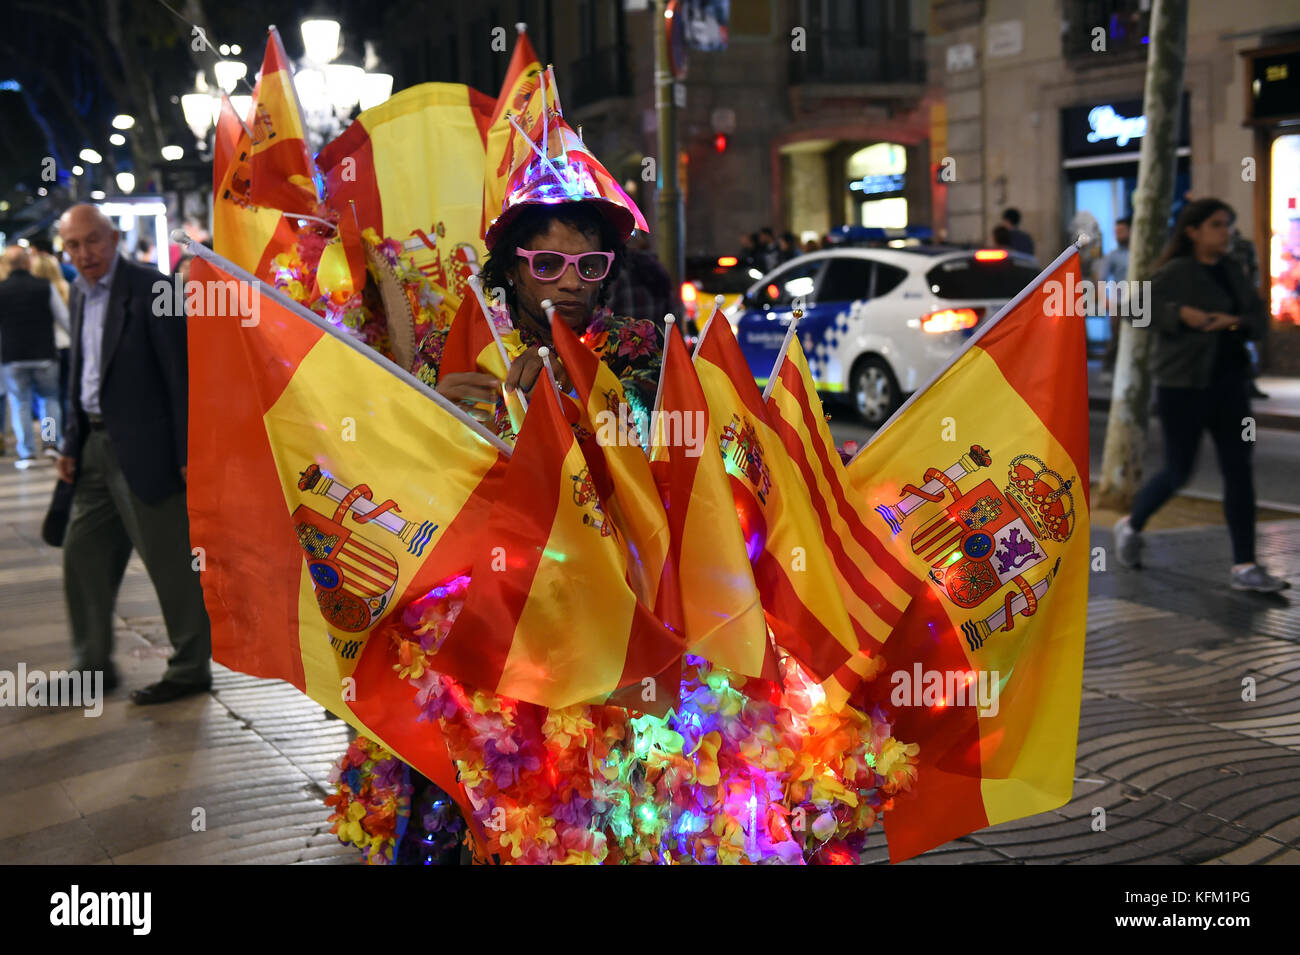 The light artist Jamal drives on his colourfully decorated bicycle with Spanish flags across Barcelona, 29 Octoebr 2017. Jamal, who is of Jamaican origin, attached several paper flowers, chain of lights and Spanish flags to his bike and drives around the streets in the night time. 'This is my personal demonstration for the unity of Spain', says Jamal. Photo: Andrej Sokolow/dpa Stock Photo